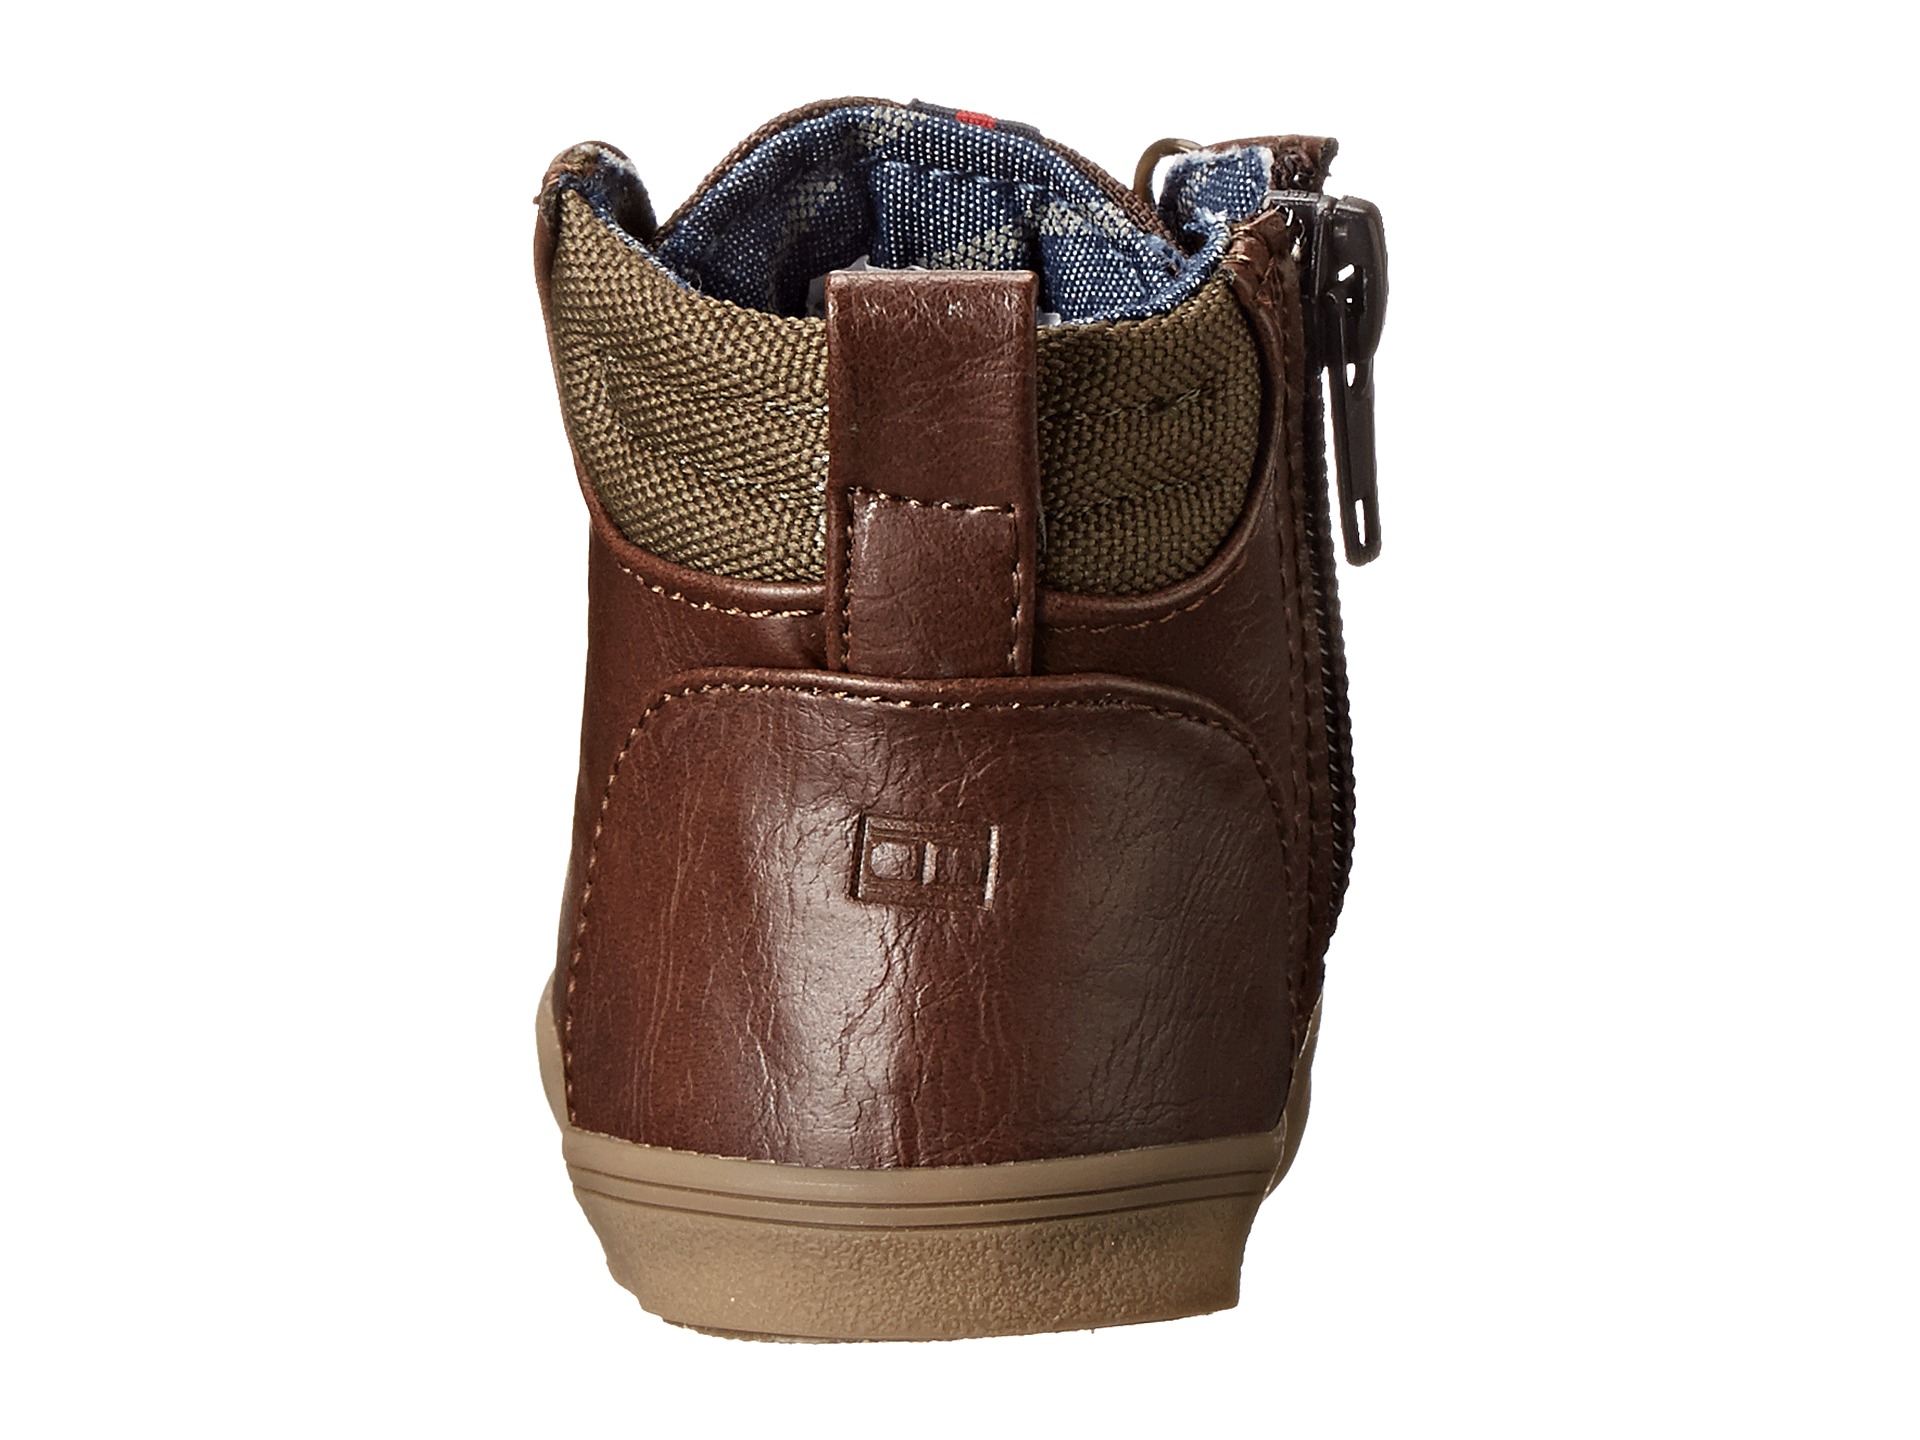 ... Kids Lil Jesse Hiking Boot Infant Toddler | Shipped Free at Zappos